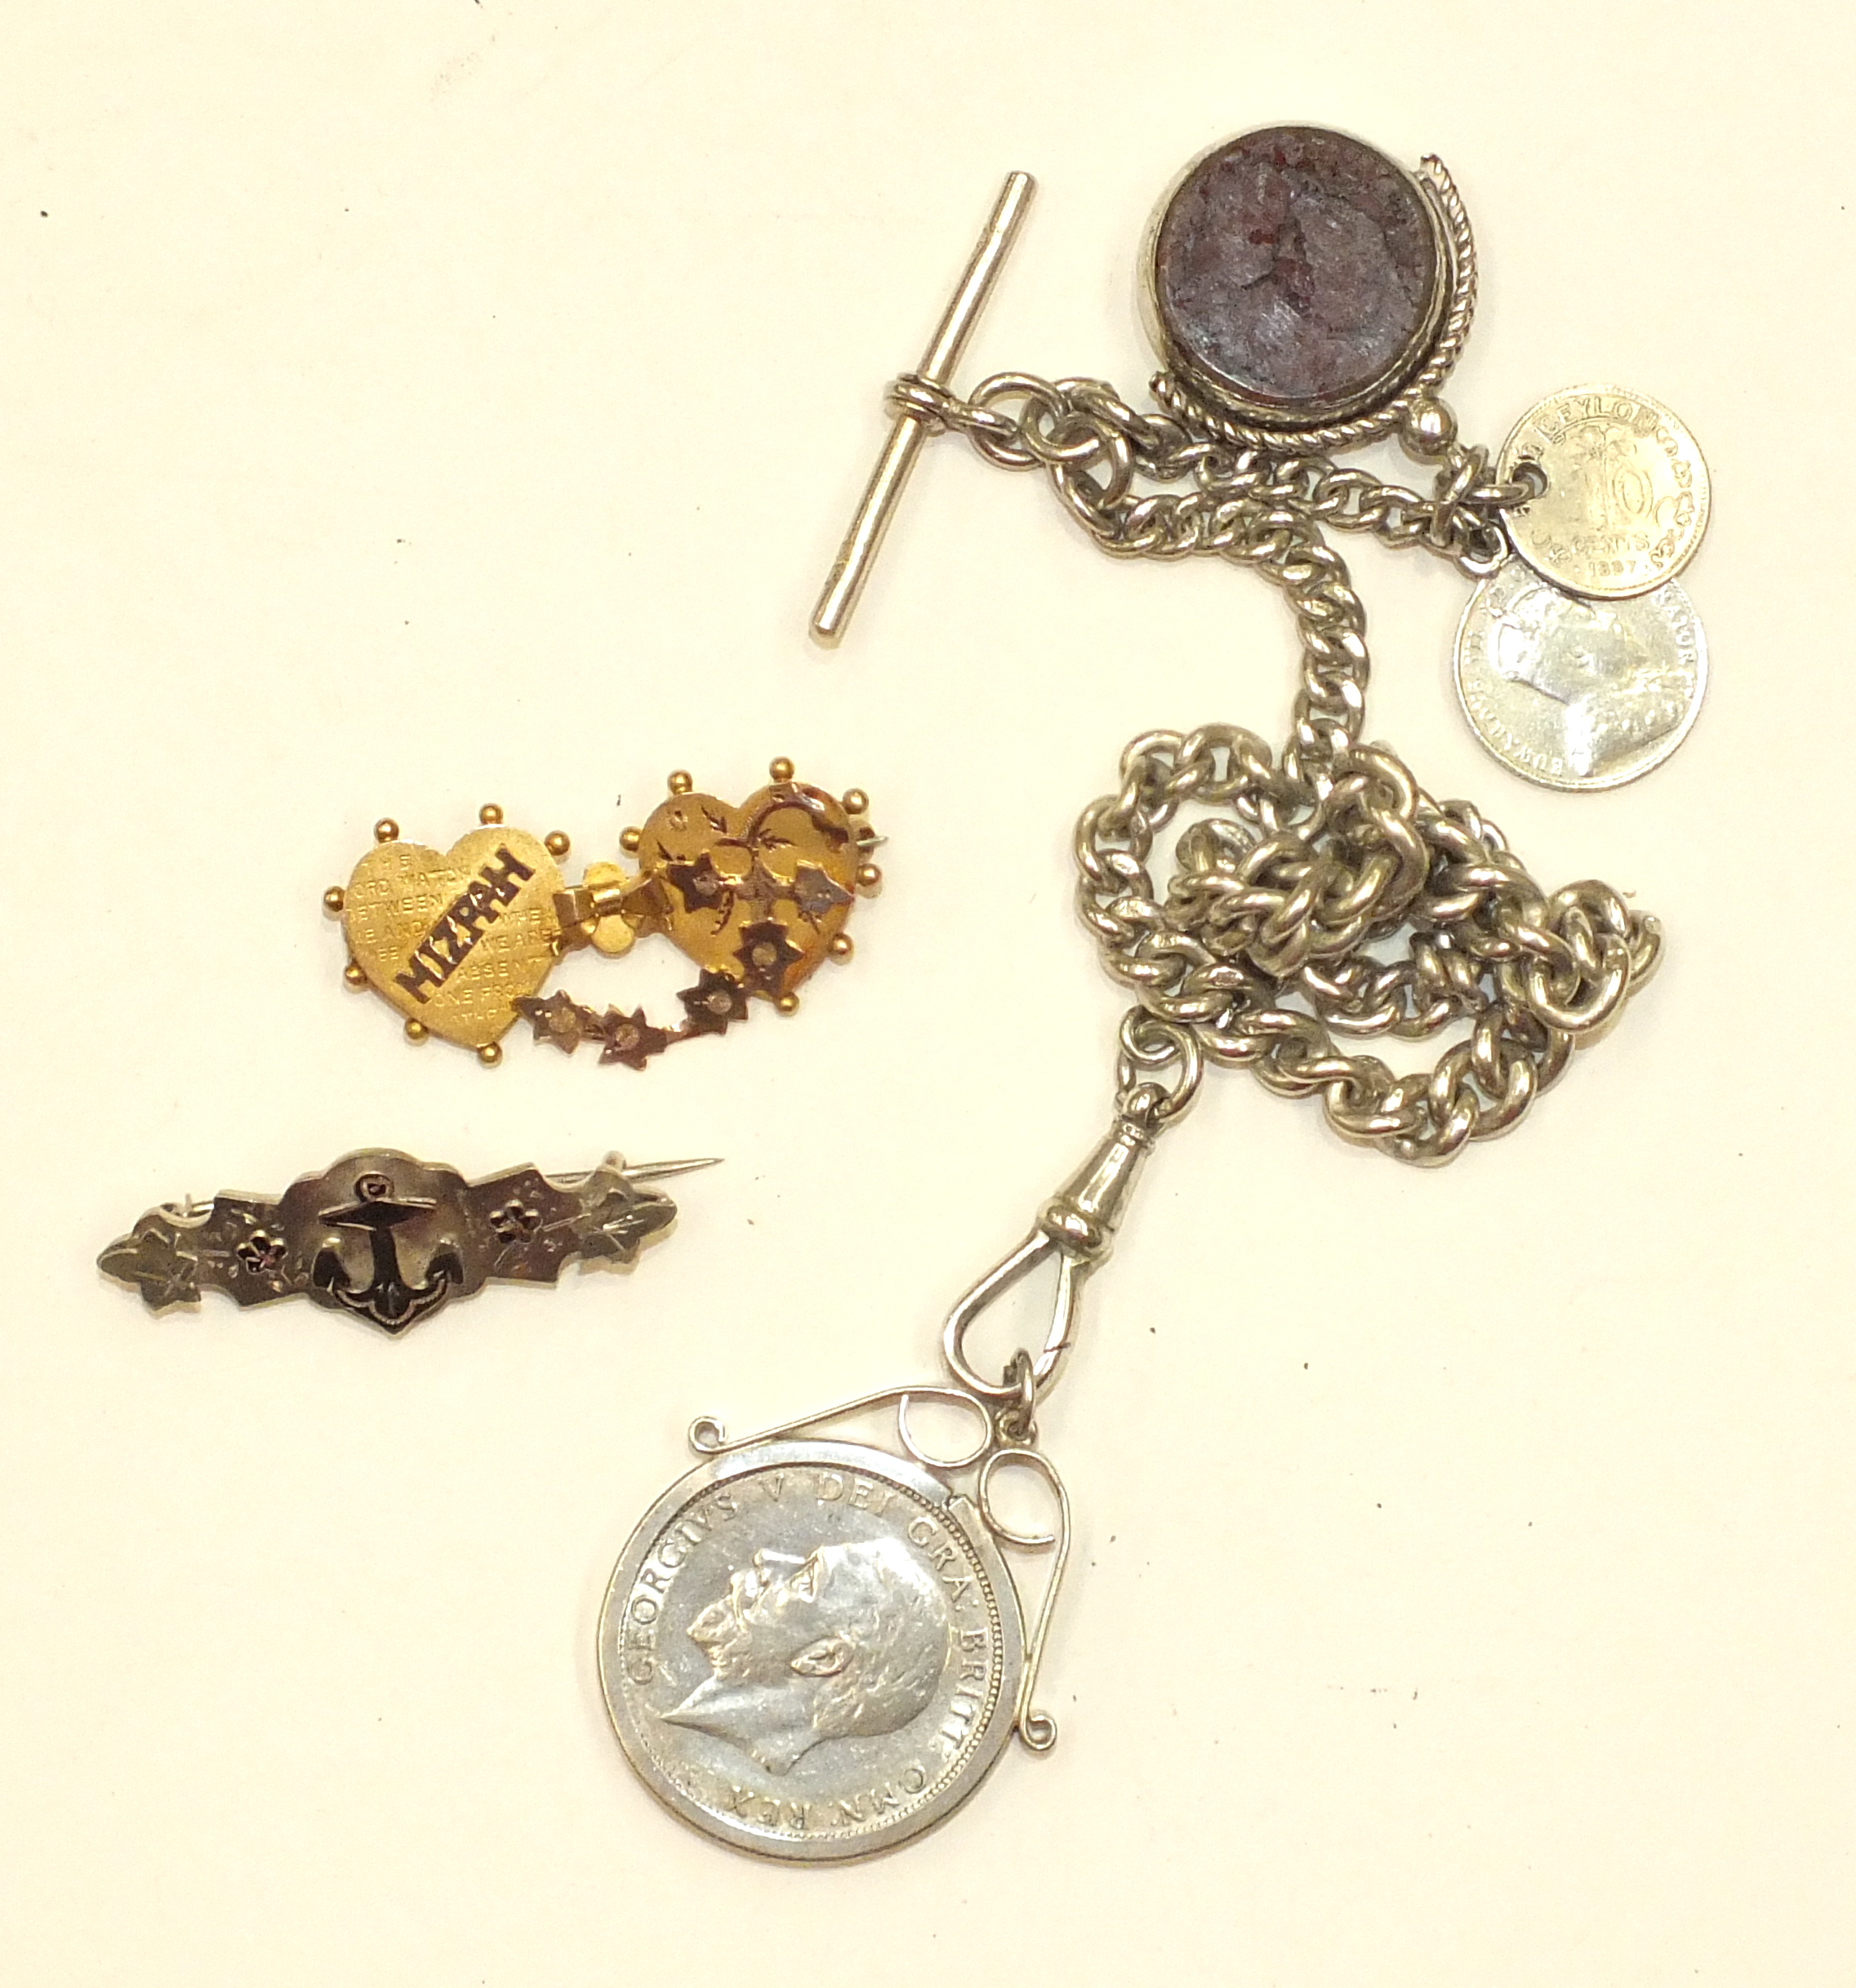 A Mizpah brooch, a silver brooch and a silver watch chain with swivel fob and medallions.